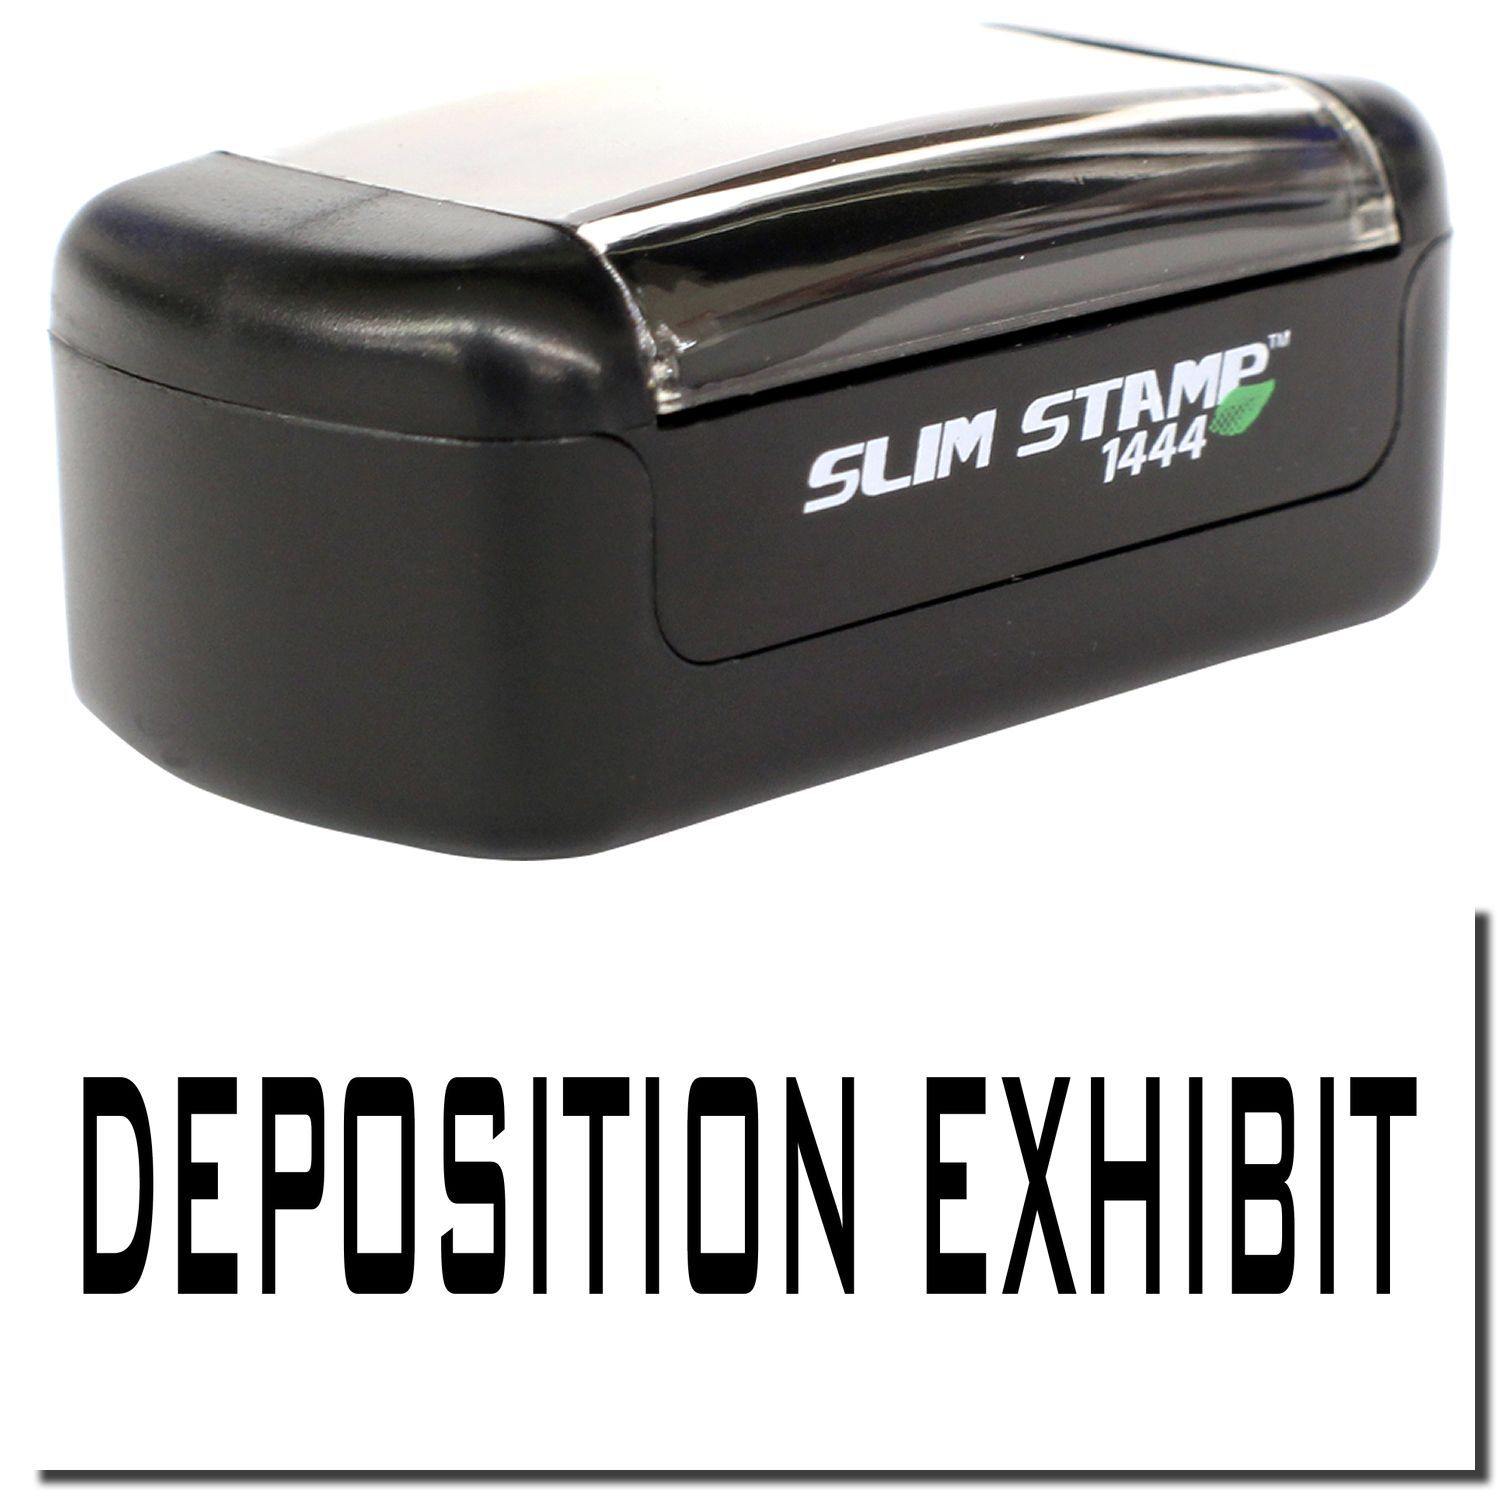 A stock office pre-inked stamp with a stamped image showing how the text "DEPOSITION EXHIBIT" is displayed after stamping.